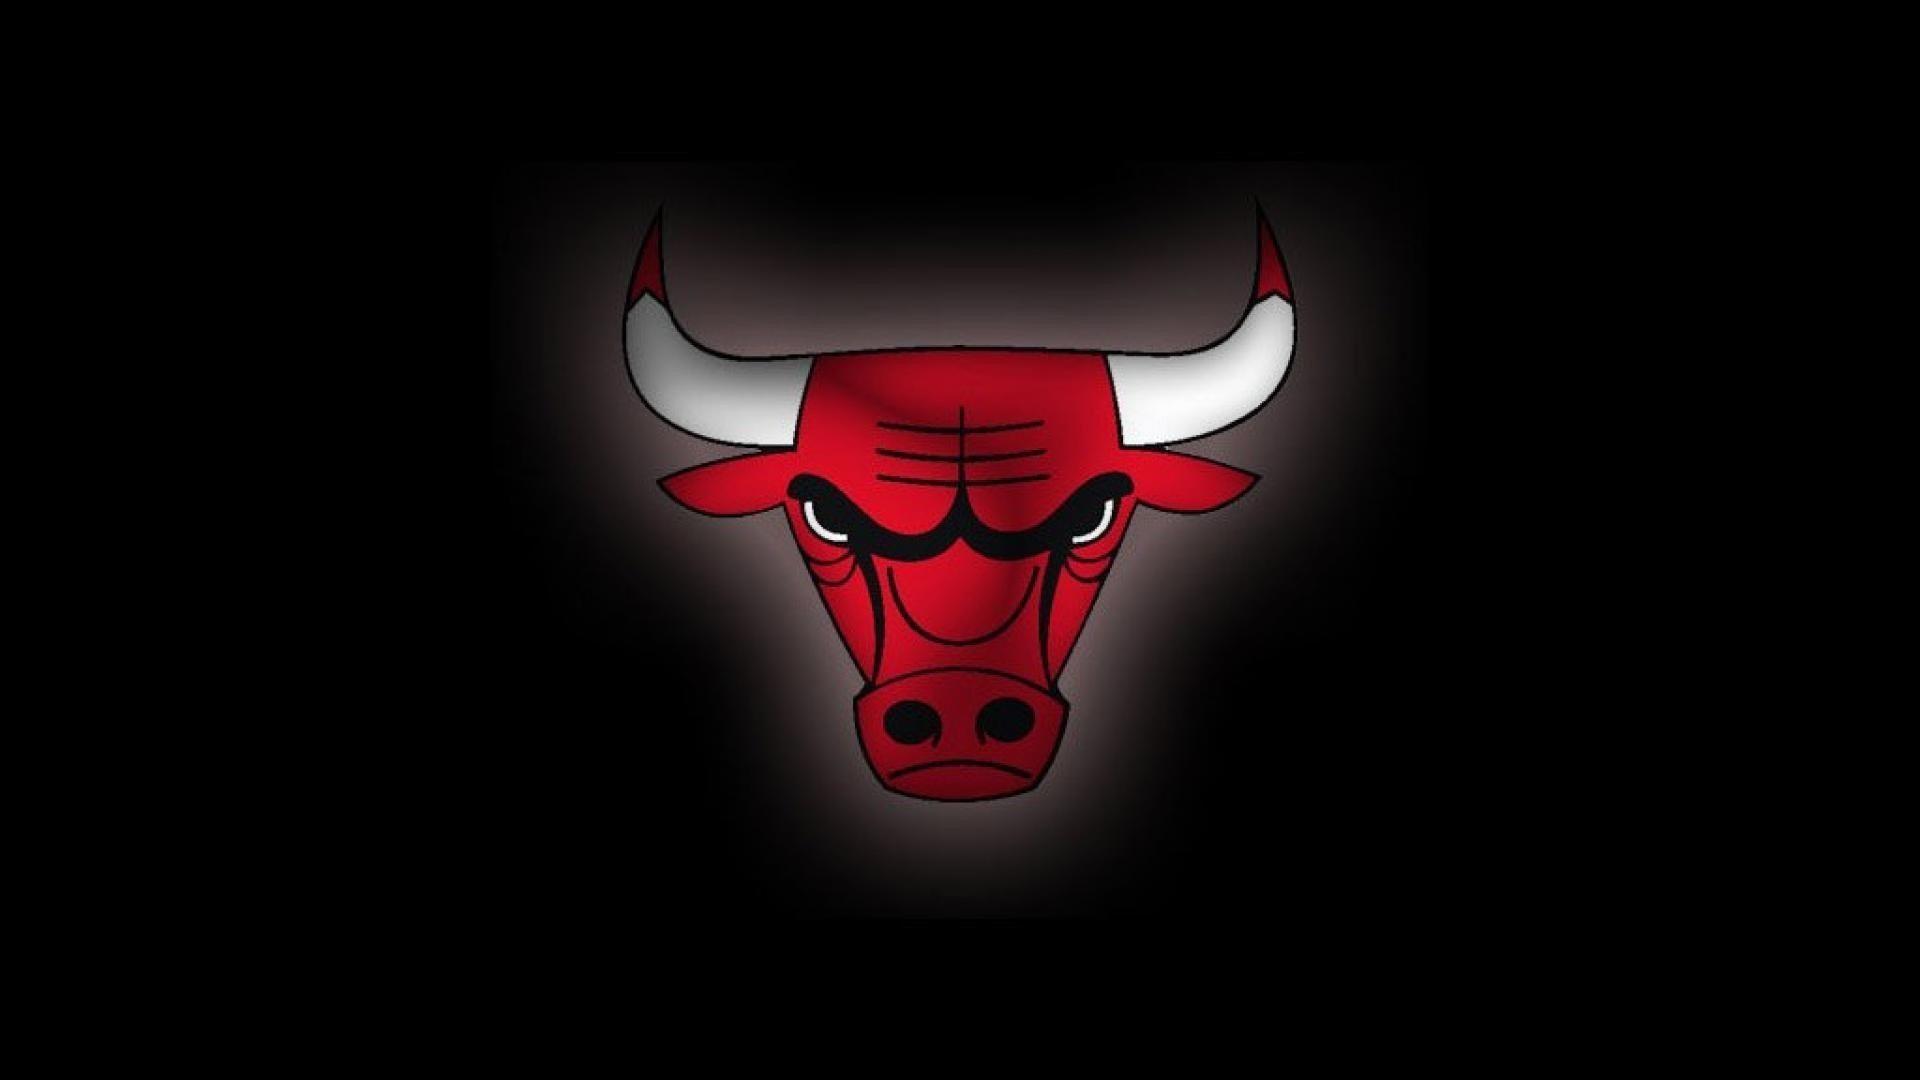 HoopsWallpaperscom  Get the latest HD and mobile NBA wallpapers today  Chicago Bulls Archives  HoopsWallpaperscom  Get the latest HD and mobile  NBA wallpapers today